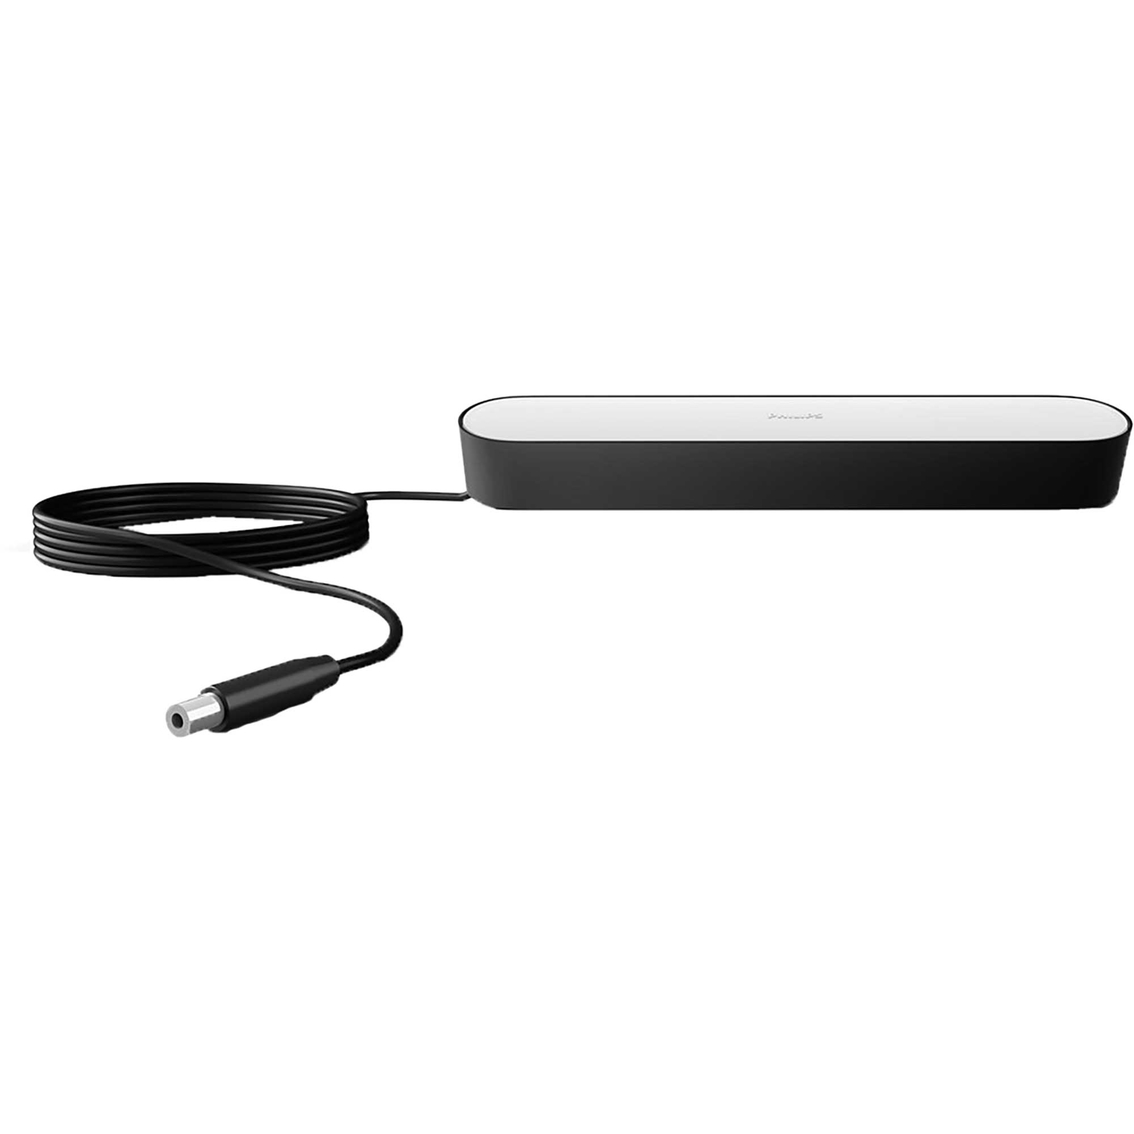 Philips Hue Play Light Bar Double Base Pack, Black - Image 4 of 7